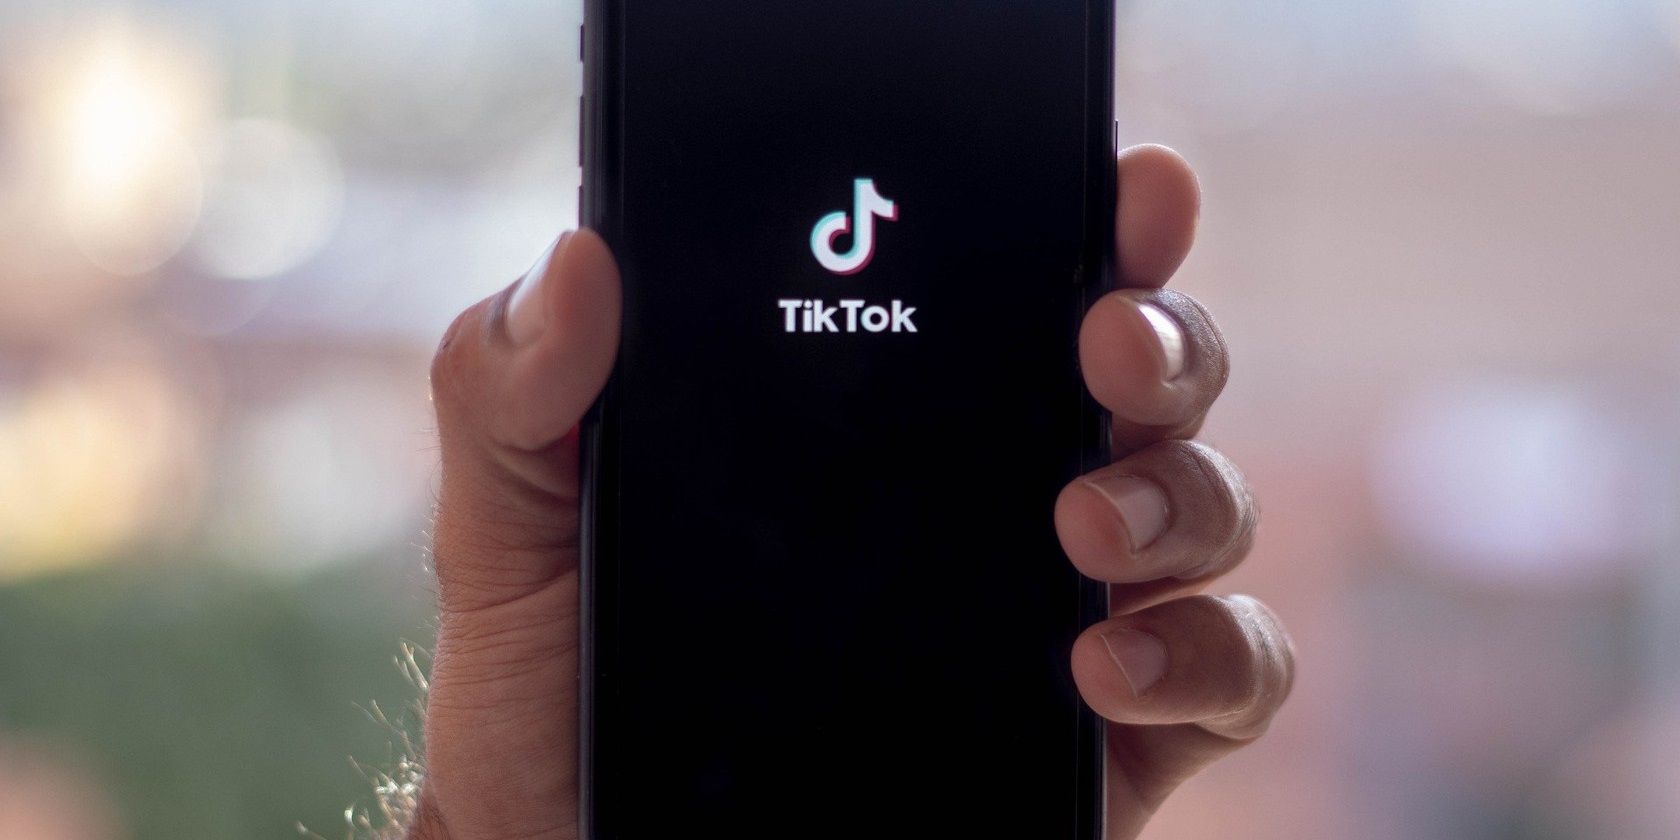 Hand holding a smartphone with TikTok written on it